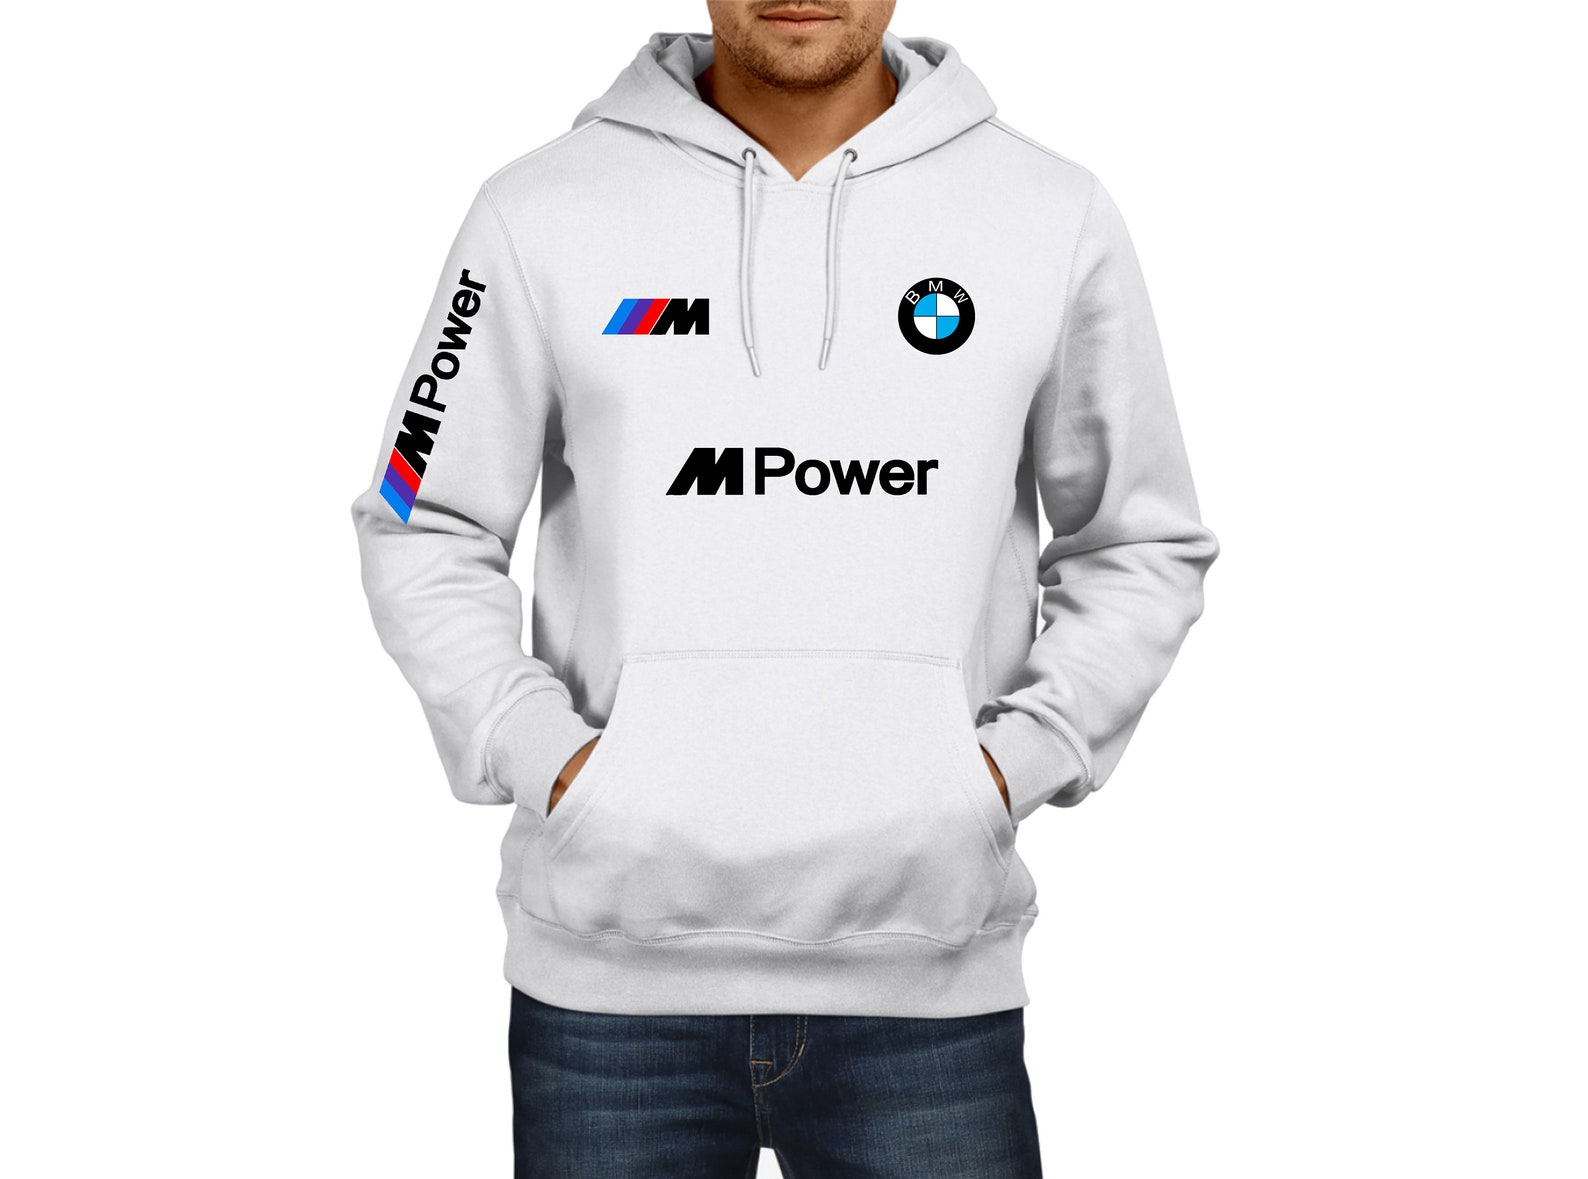 BMW Hoodies M Power Pullover Available in All Colors | Etsy